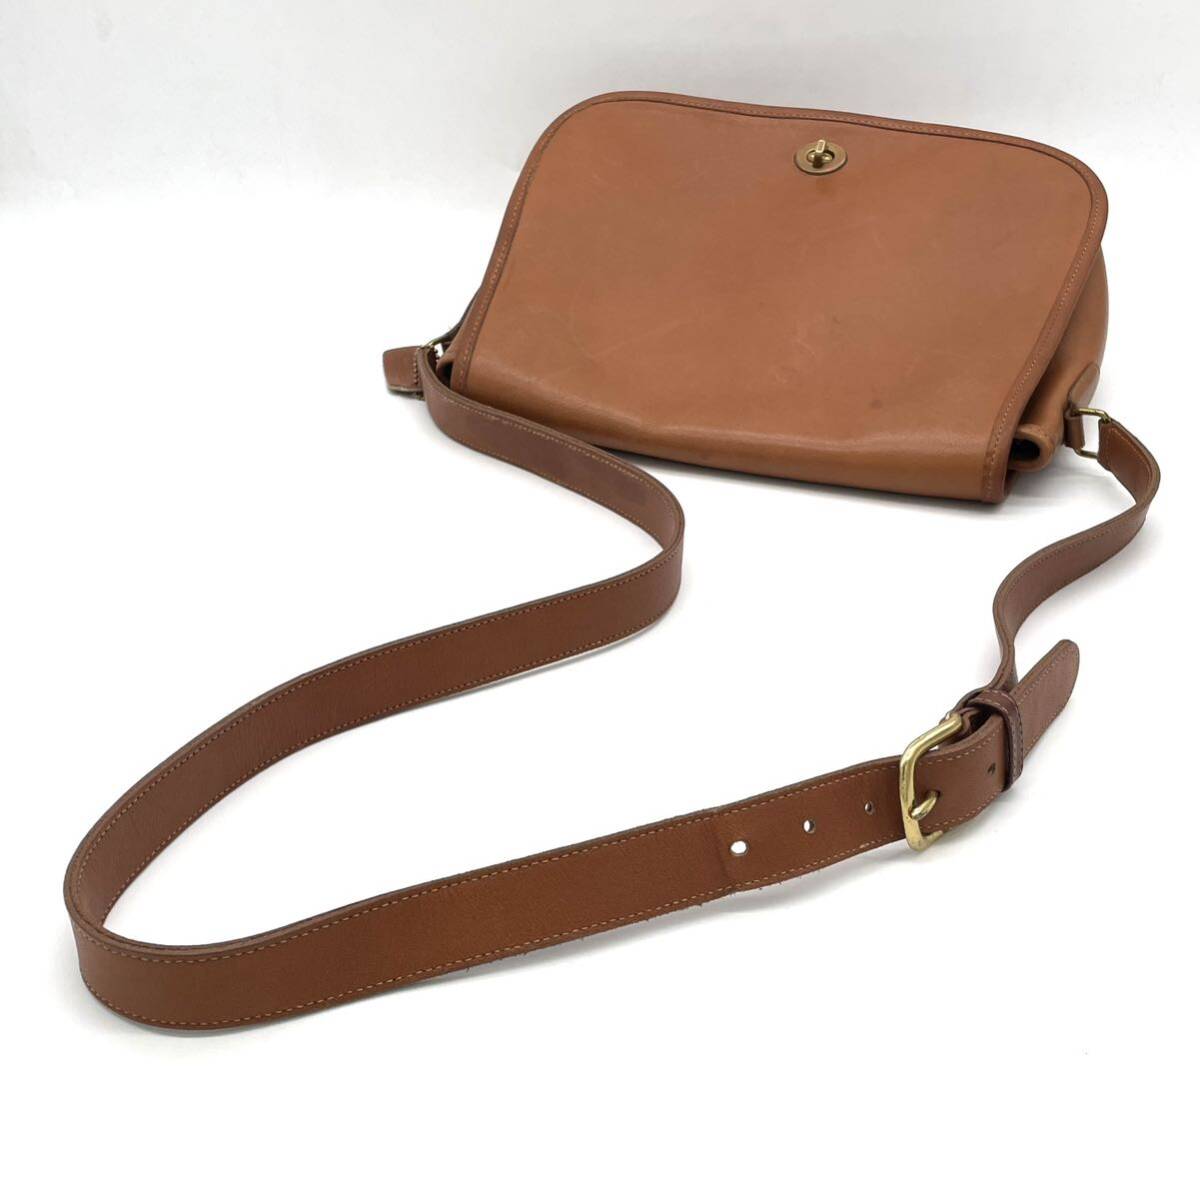 1 jpy superior article COACH Old Coach car f leather Brown shoulder bag Cross body Turn lock Gold metal fittings 